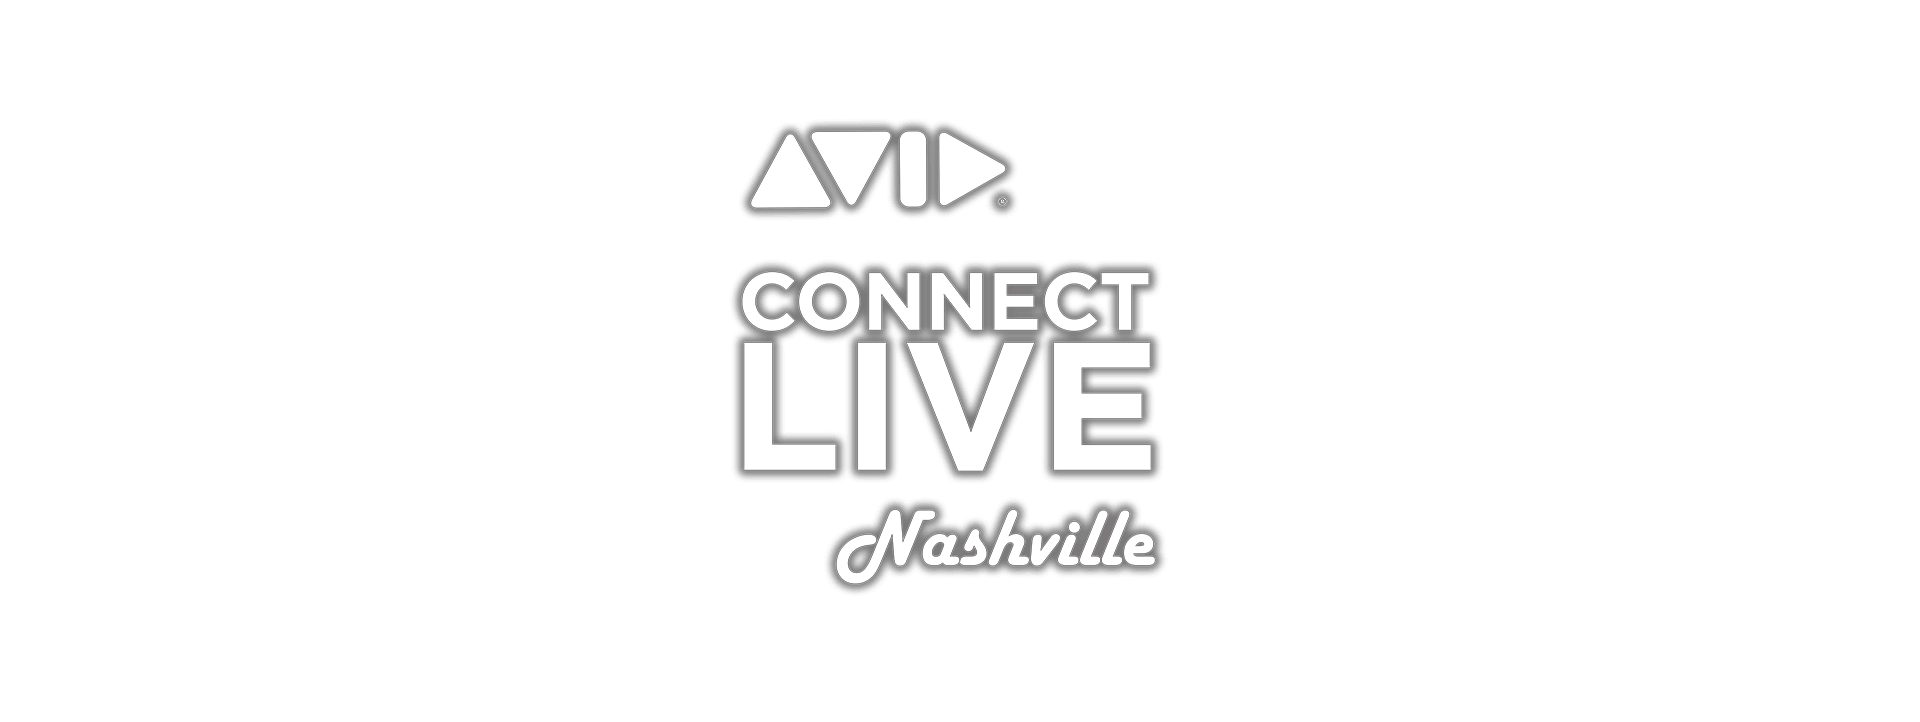 Avid to Introduce New Products at Avid Connect in Nashville